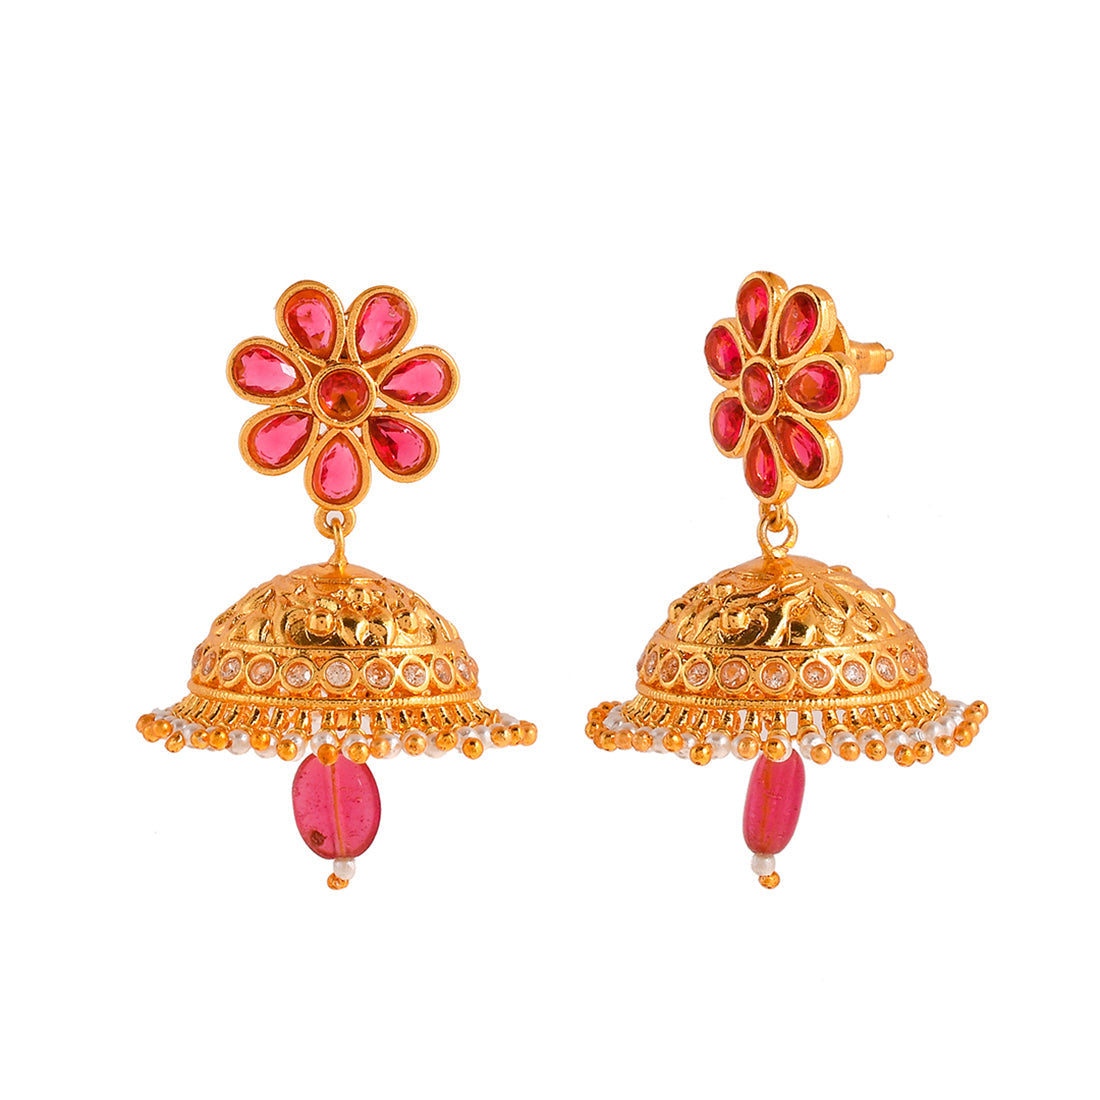 Women's Abharan Red Stones And Pearls Floral Jhumka Earrings - Voylla